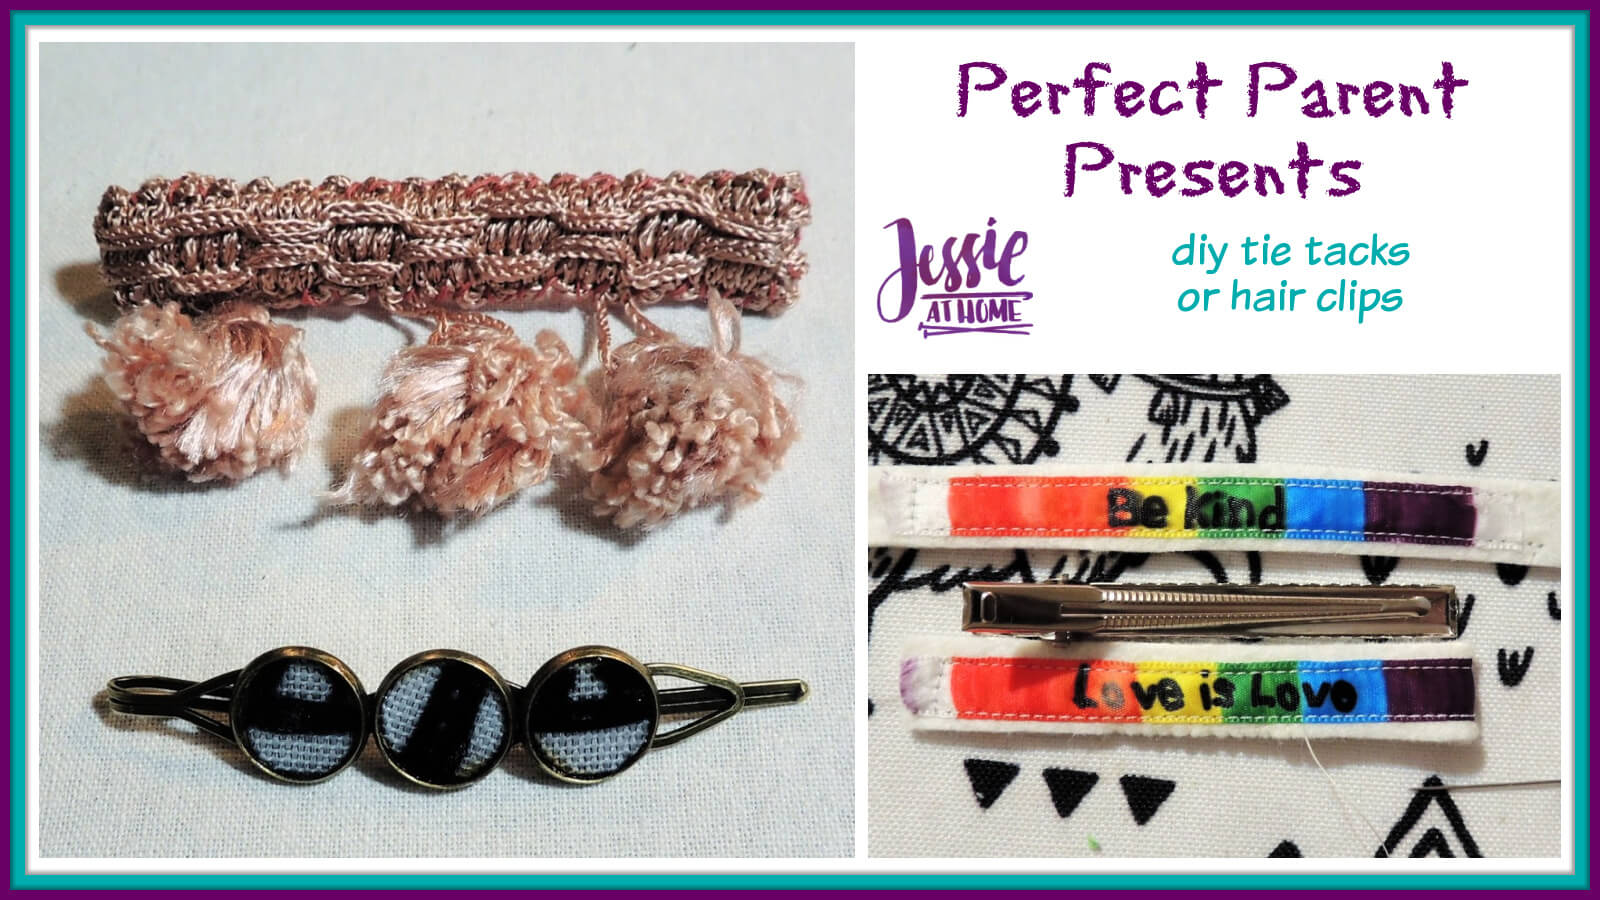 Perfect Parent Presents - DIY Tie Tacks or Hair Clips by Jessie At Home - Social